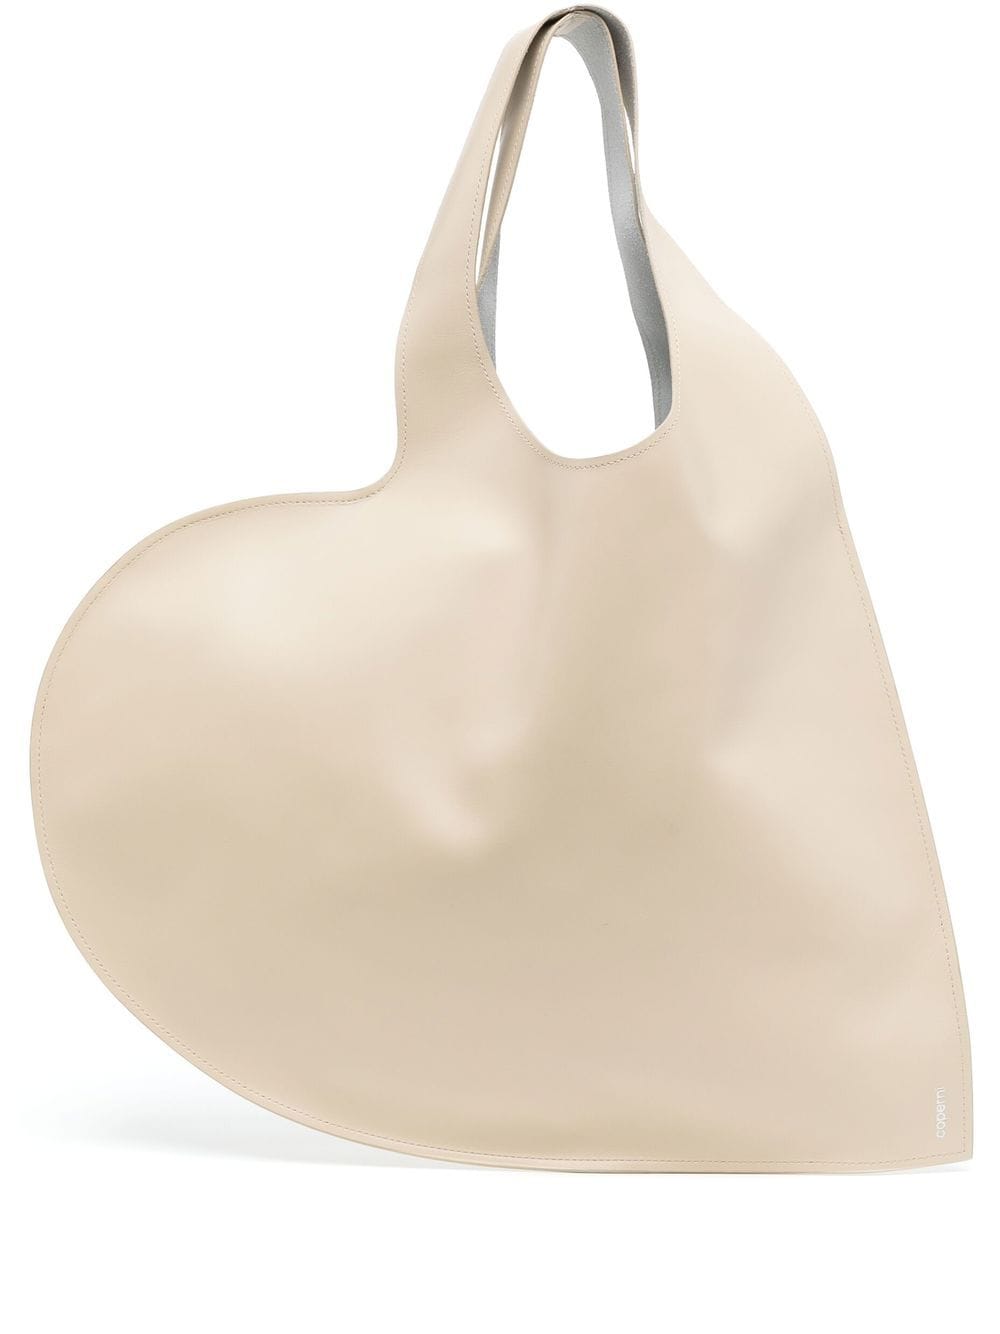 heart cut-out tote